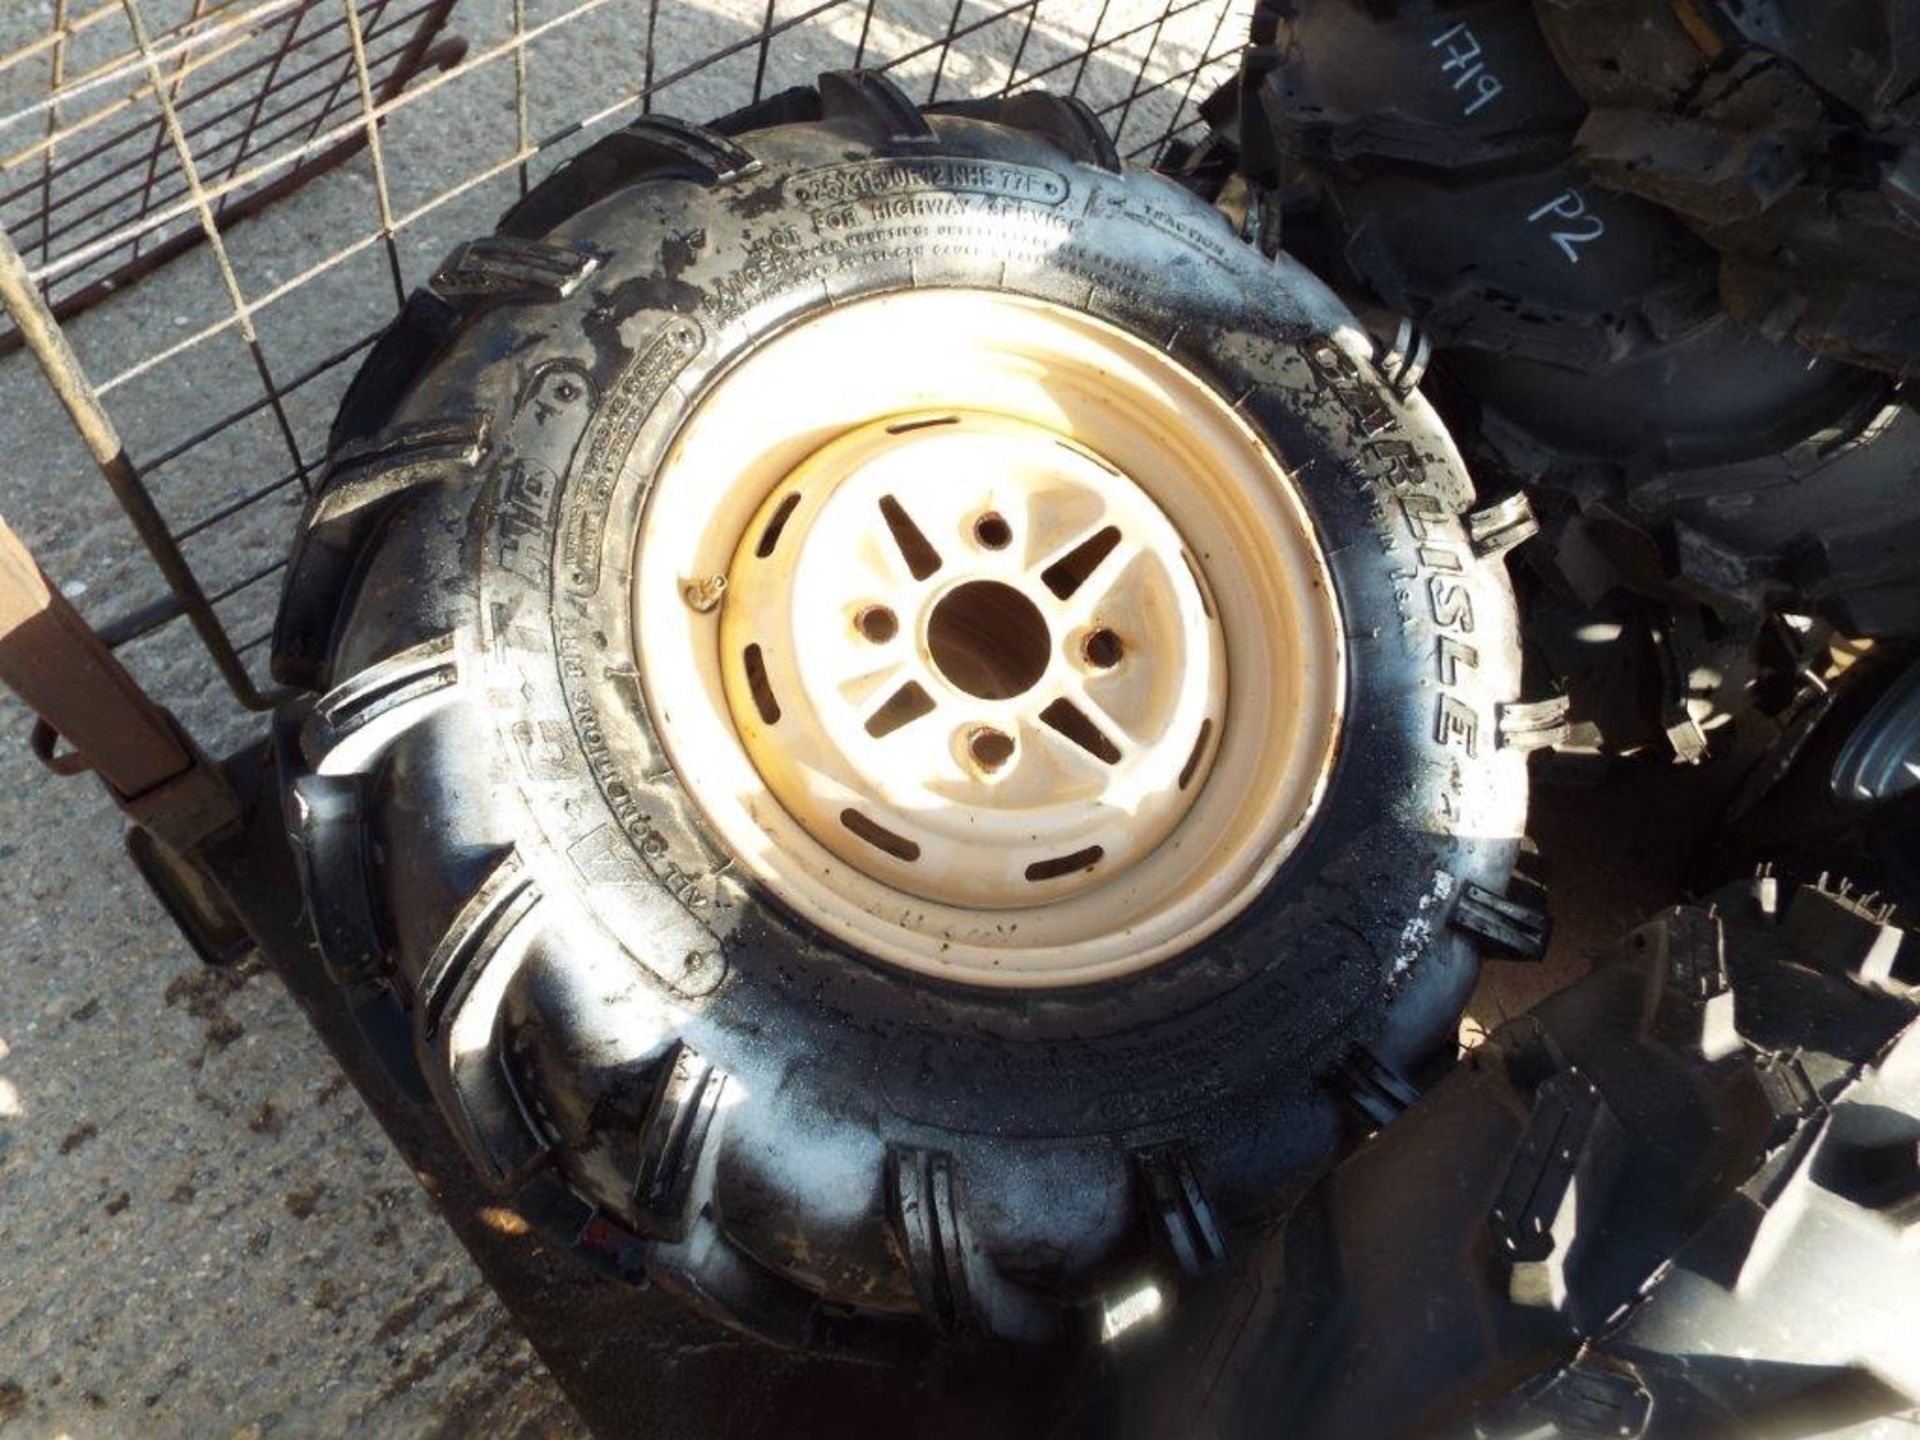 6 x Carlisle ACT 25x11R12 and 2 x 25x8R12 ATV Tyres on Rims - Image 14 of 16